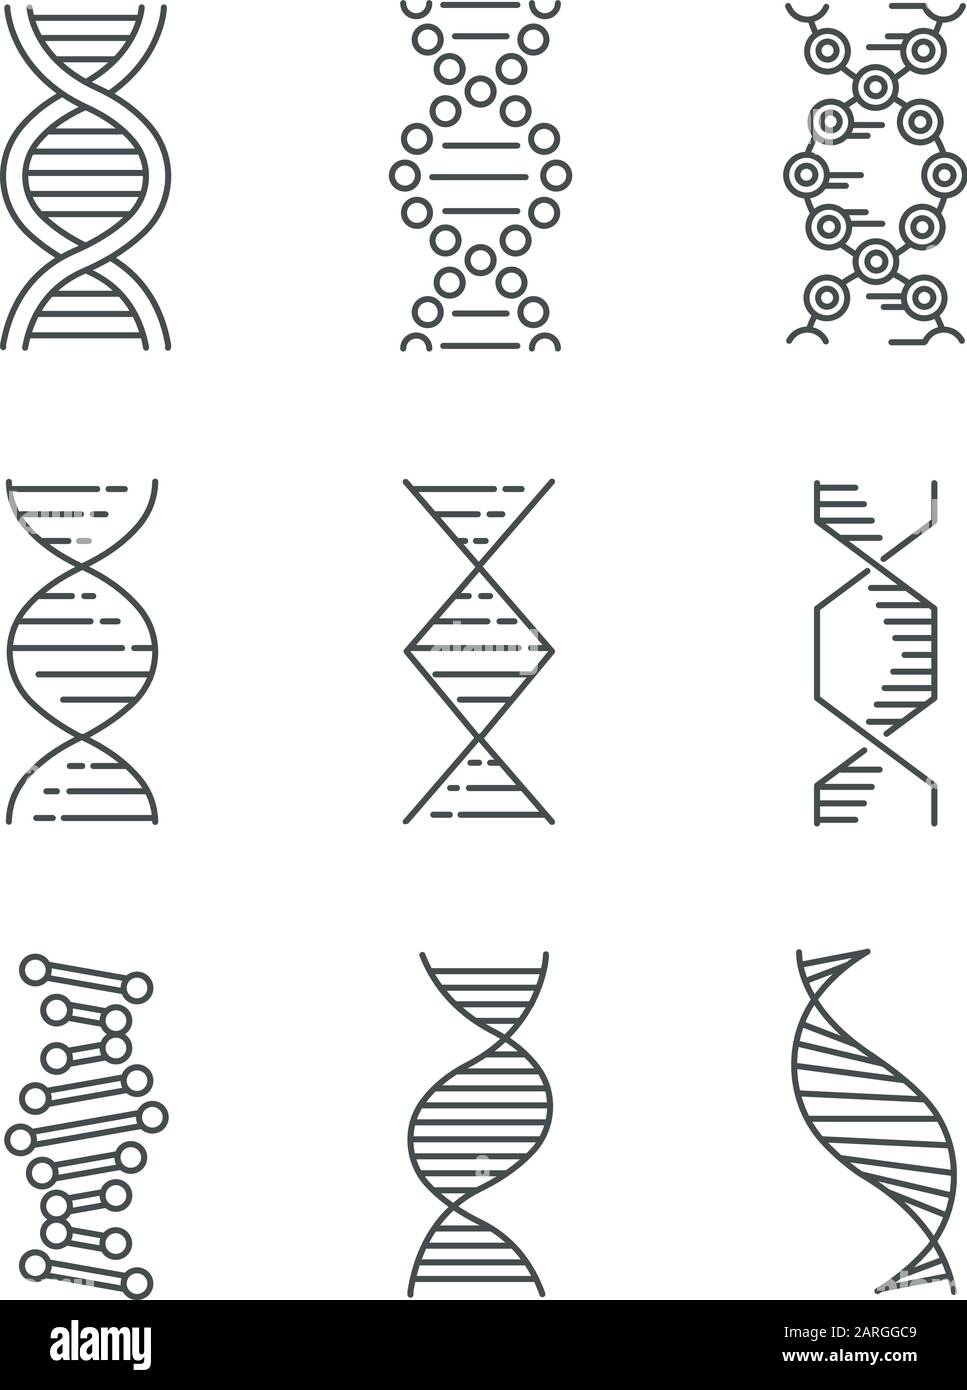 DNA spirals linear icons set. Deoxyribonucleic, nucleic acid helix. Molecular biology. Genetic code. Genetics. Thin line contour symbols. Isolated vec Stock Vector